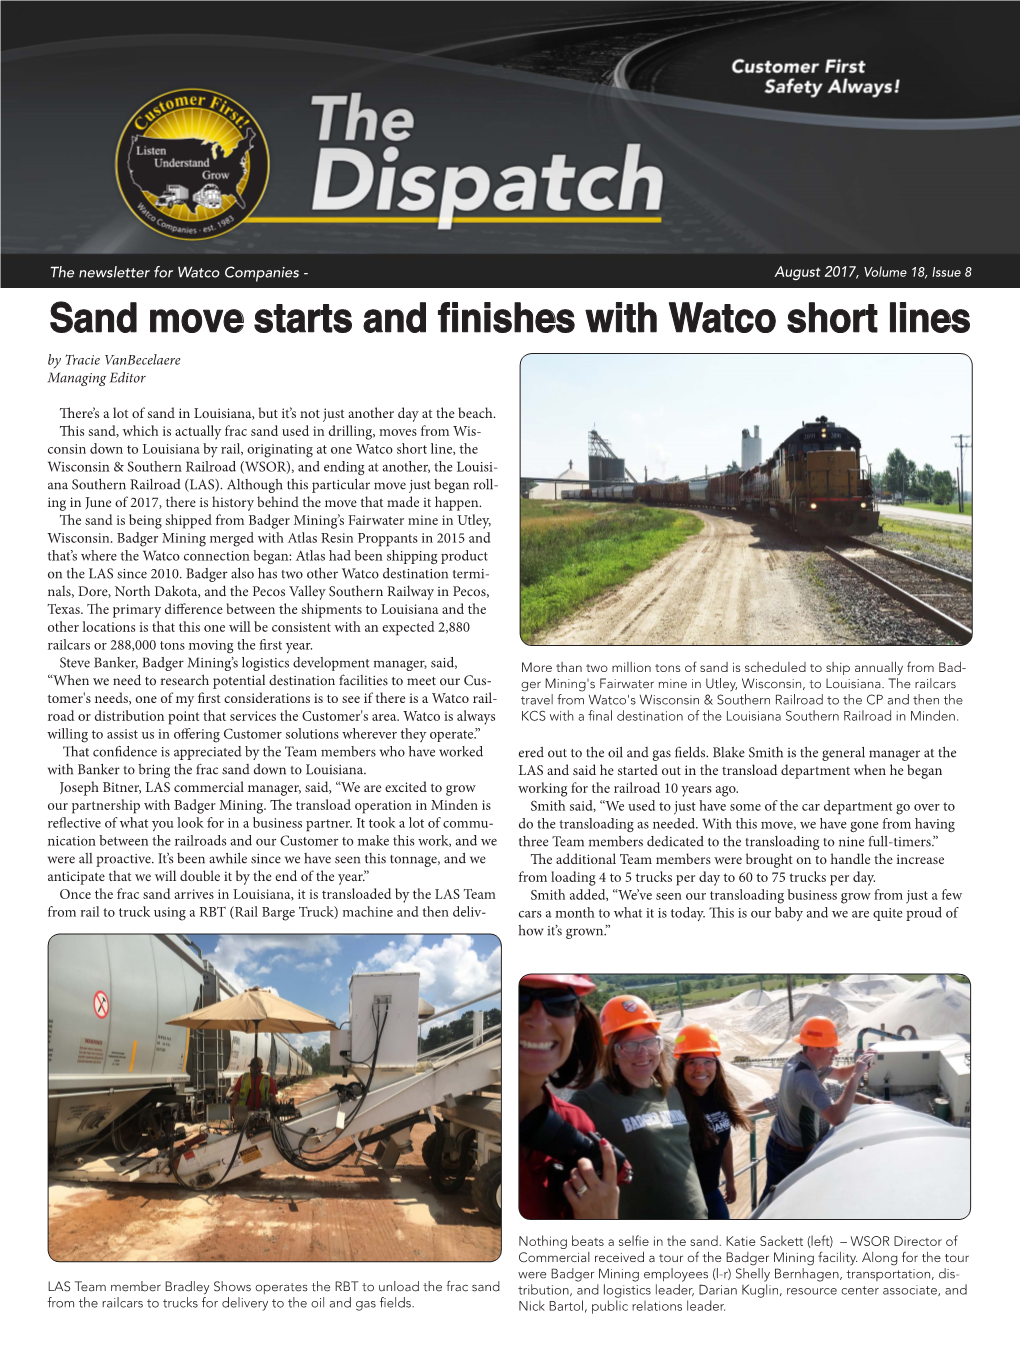 Sand Move Starts and Finishes with Watco Short Lines by Tracie Vanbecelaere Managing Editor